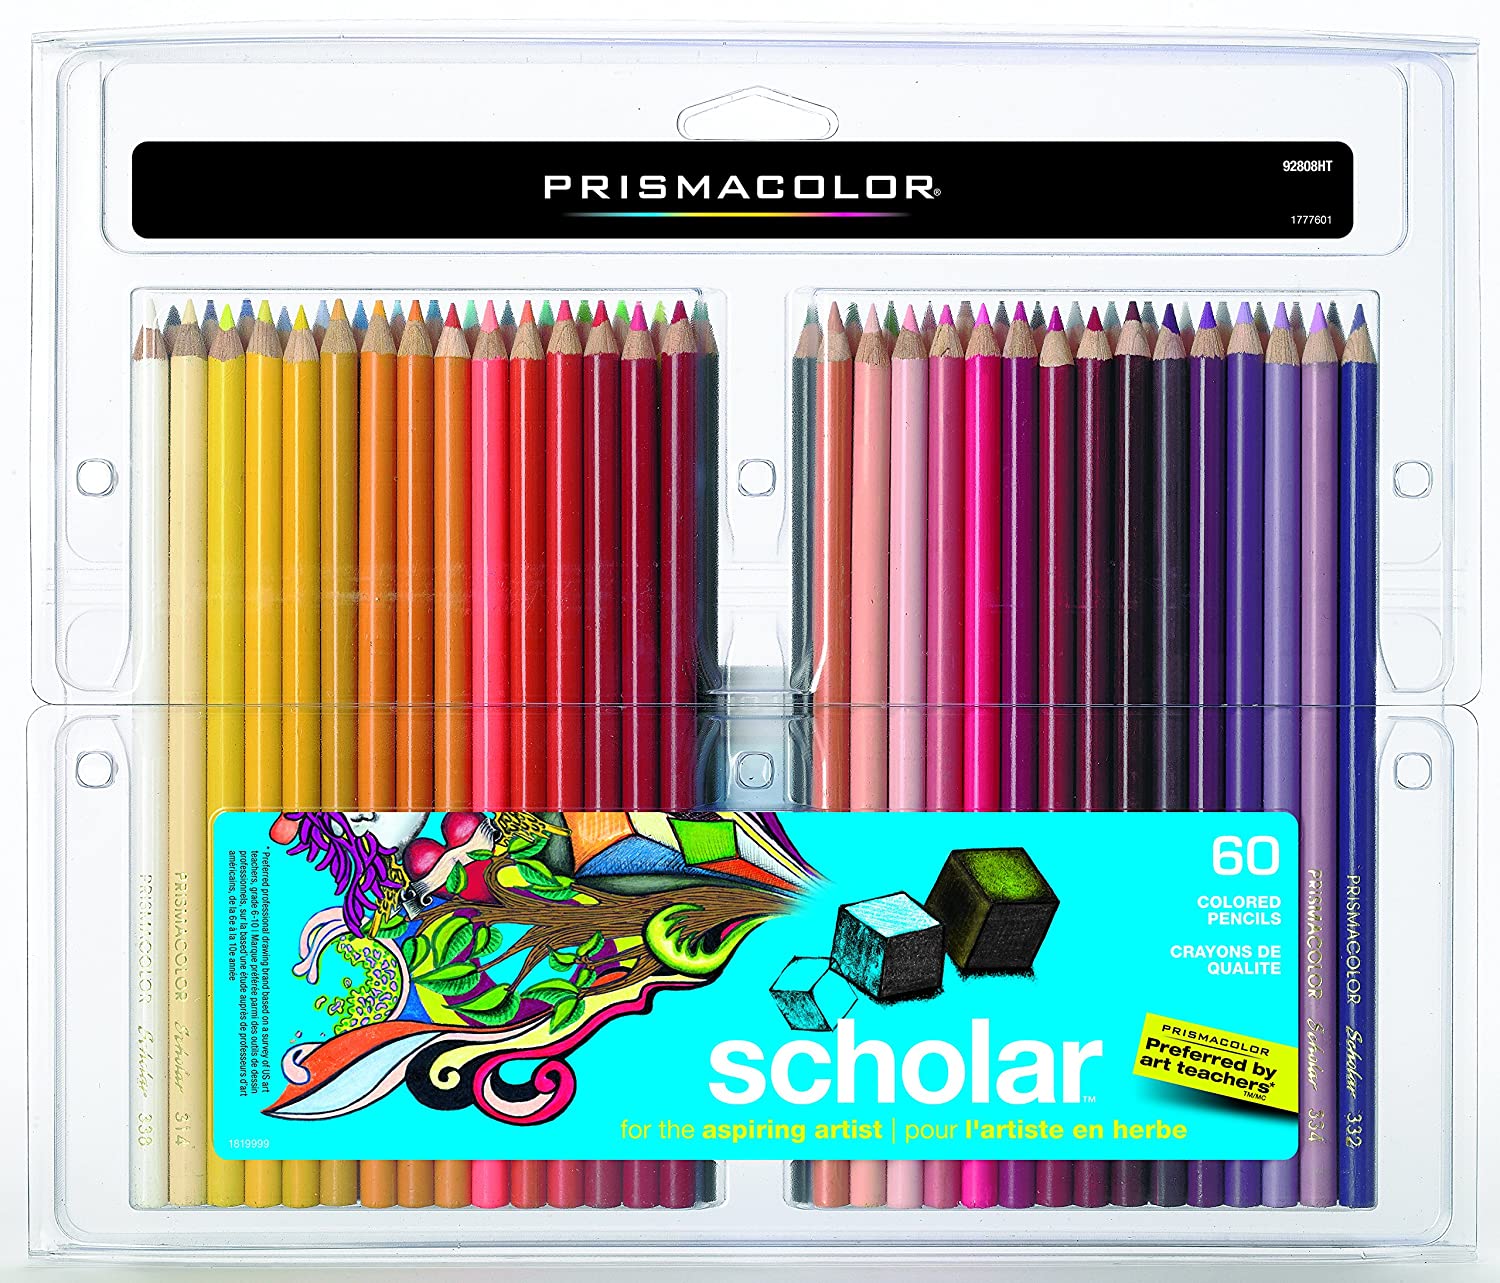 Prismacolor Markers for sale in Chiclayo, Peru